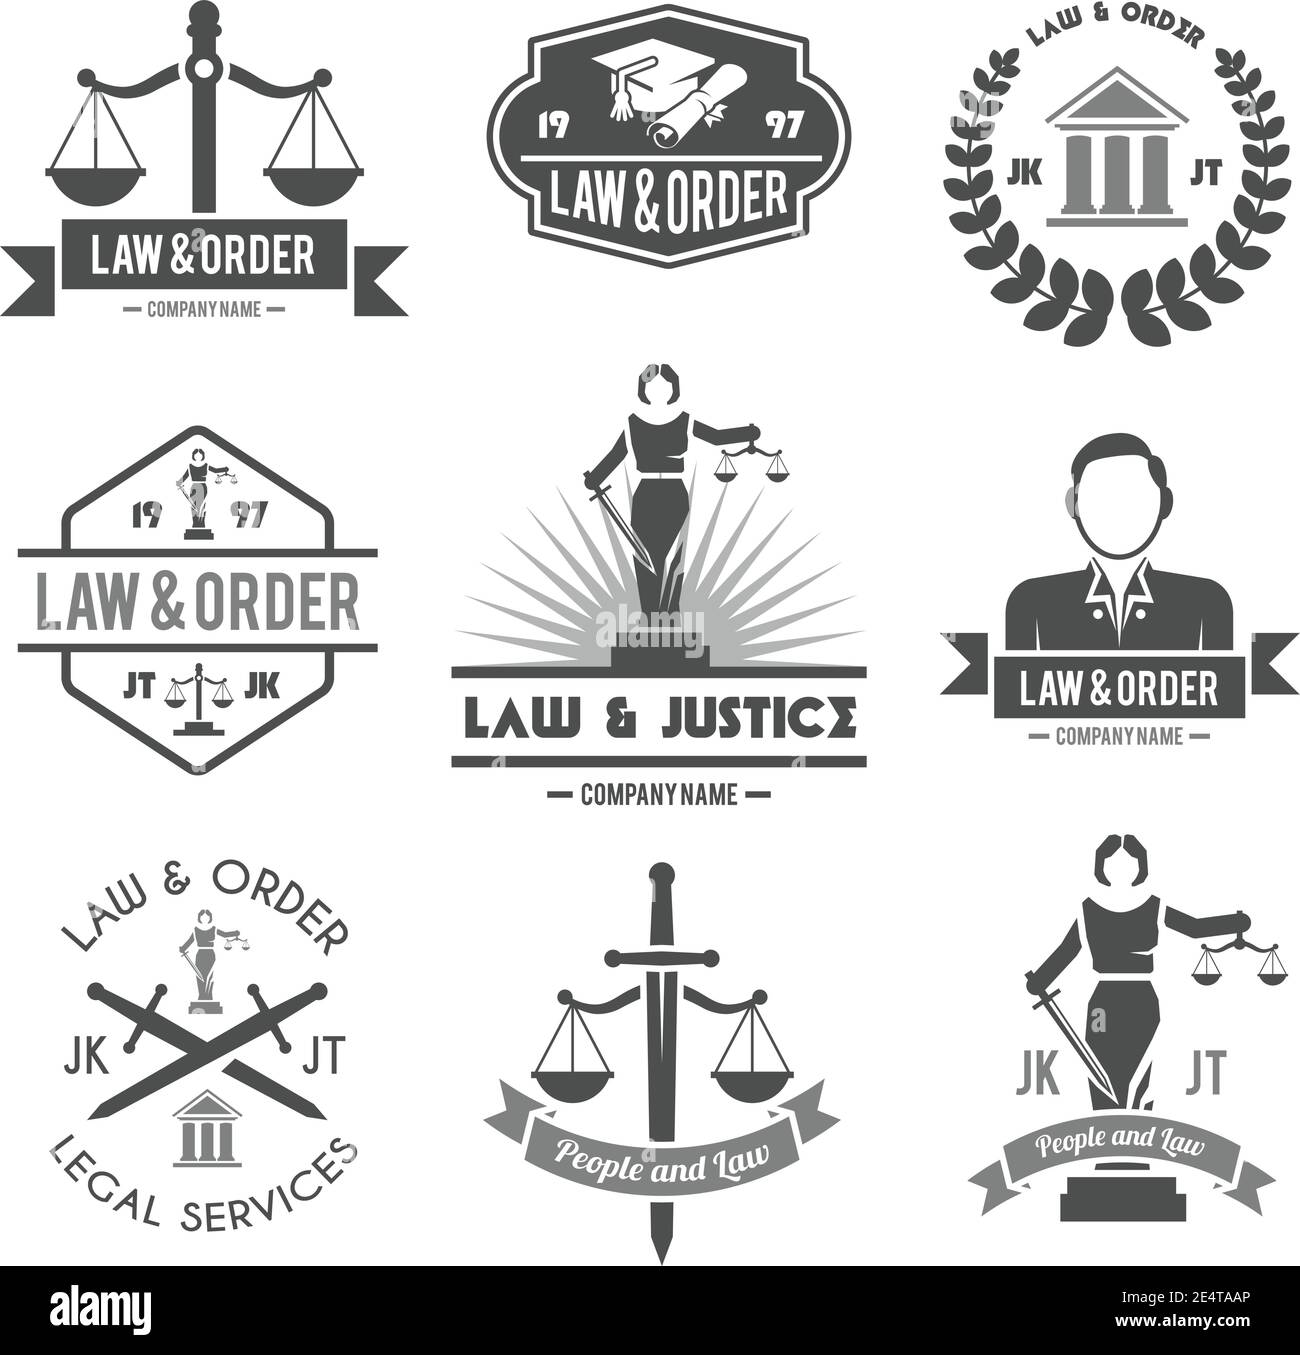 Law order and crime preventing lady justice symbols collection black graphic labels pictograms set isolated vector illustration Stock Vector